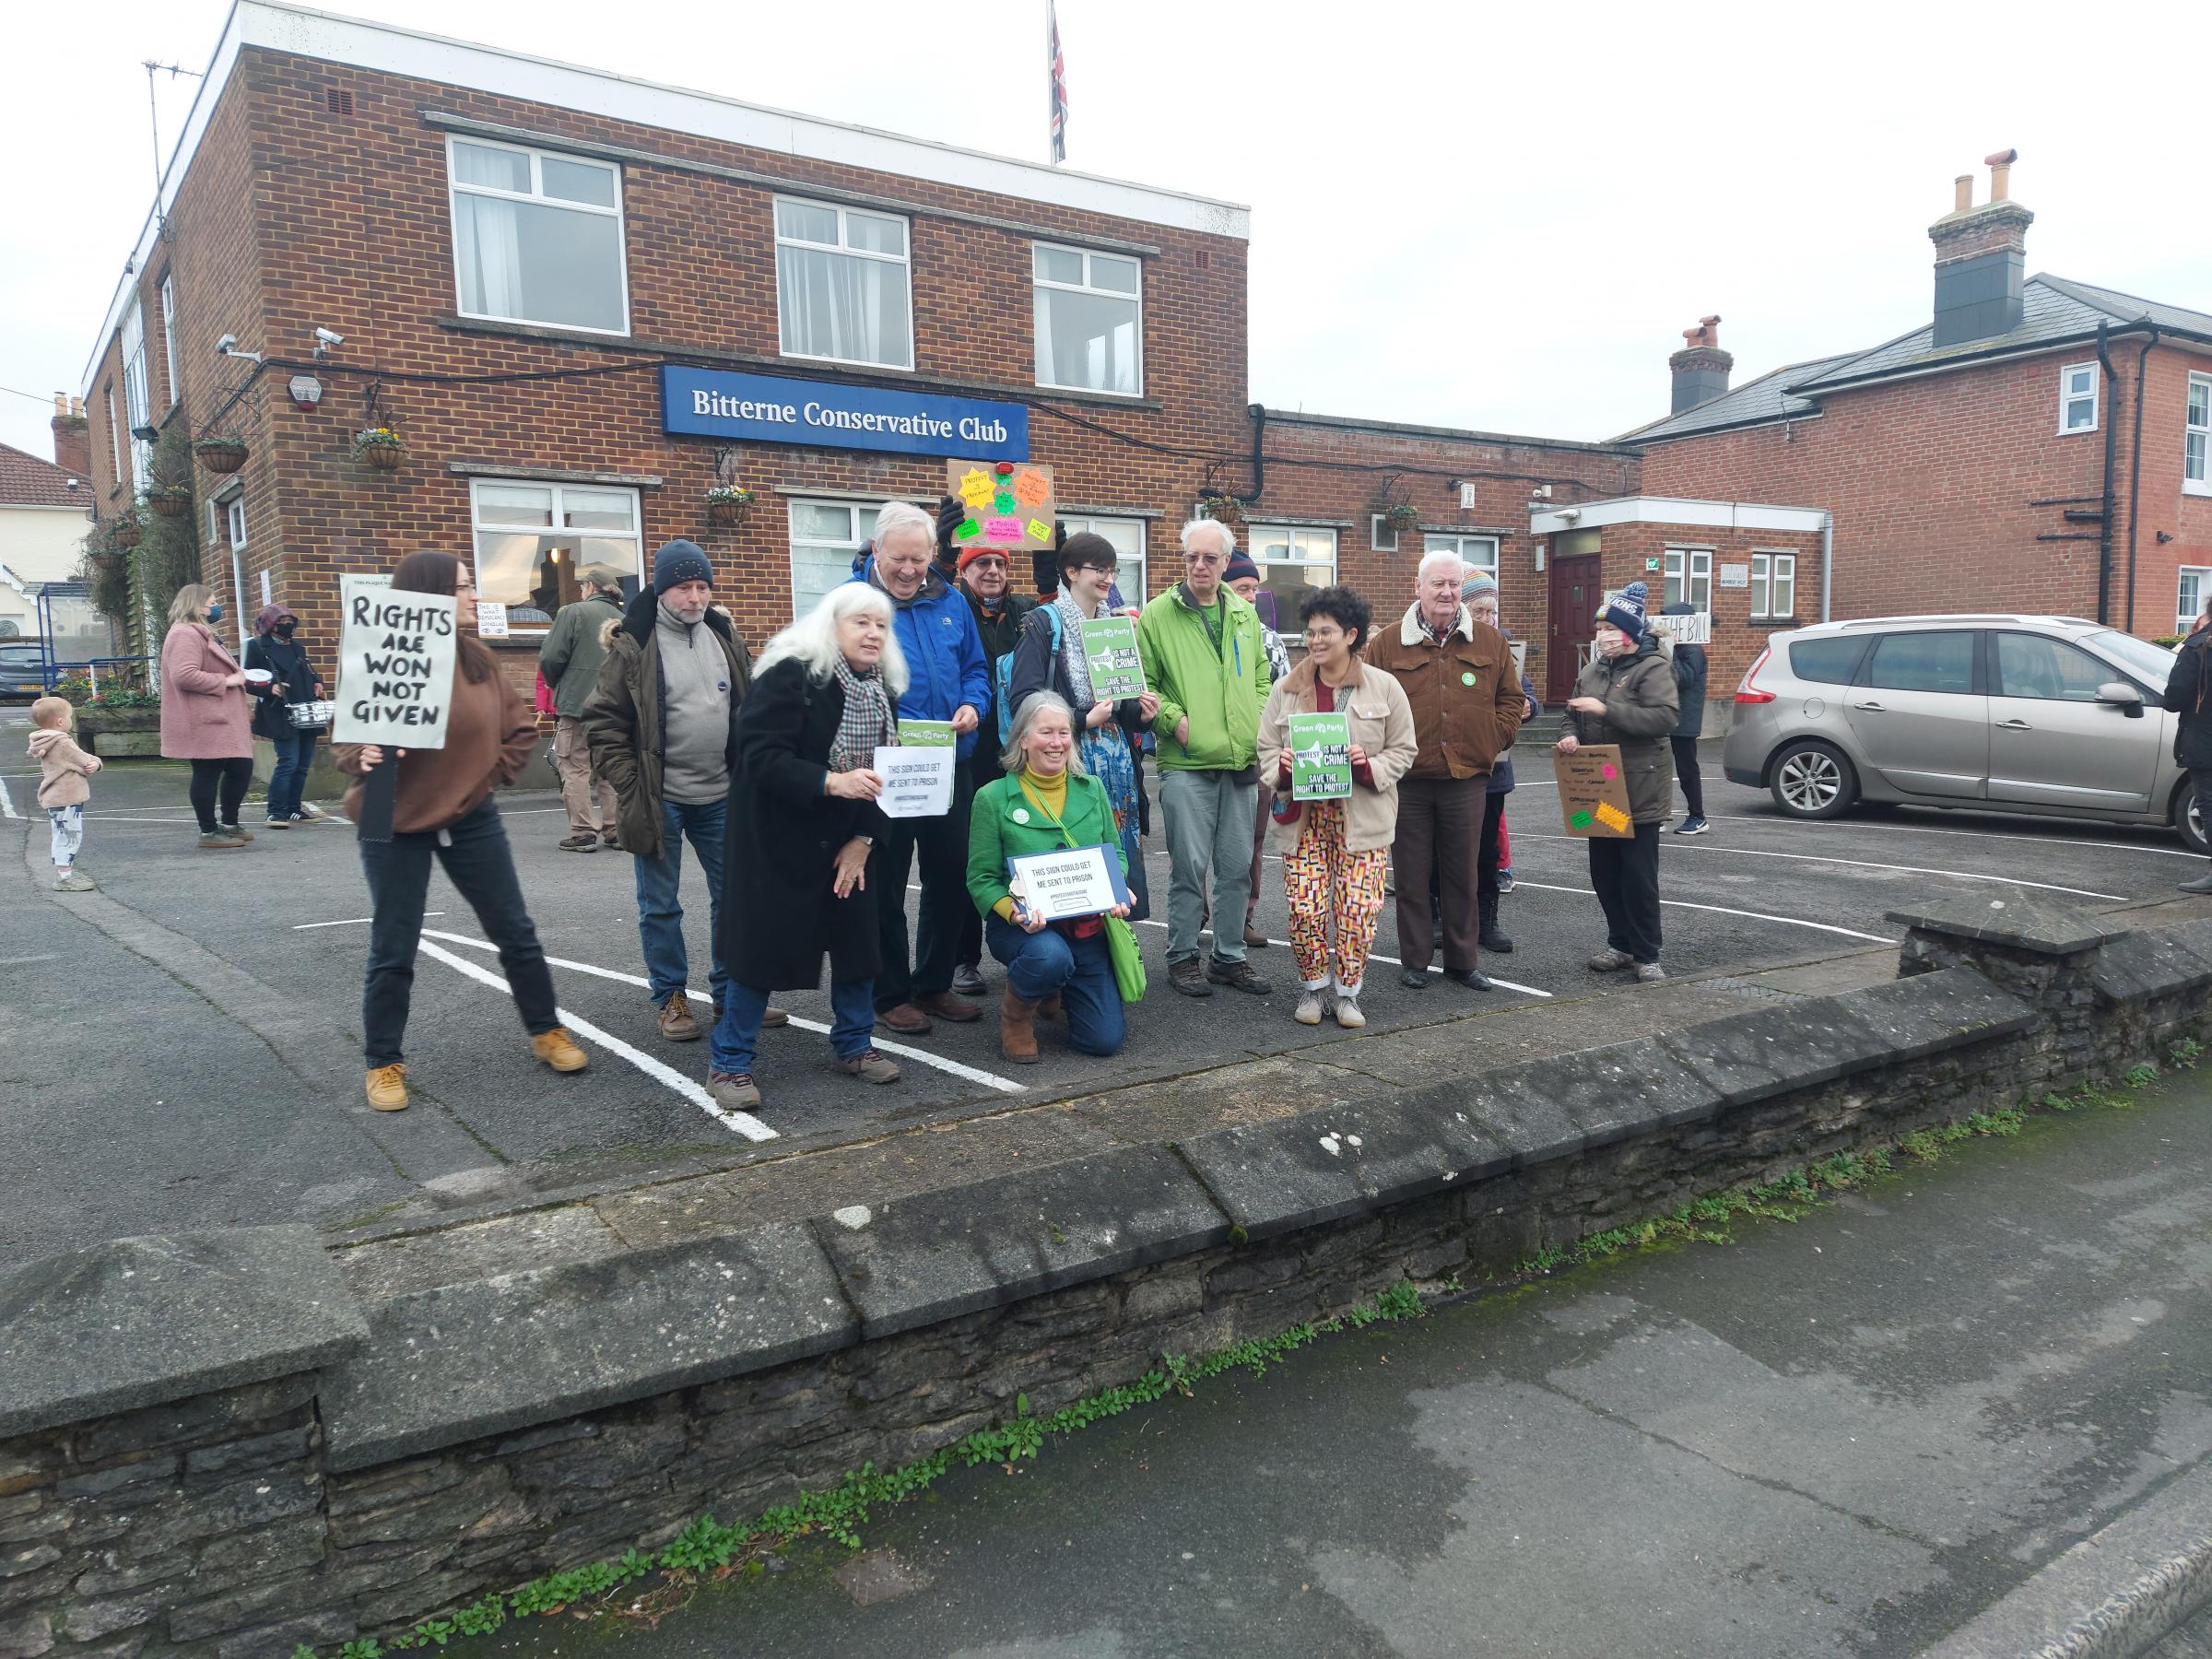 The protests at Bitterne Conservative Club 